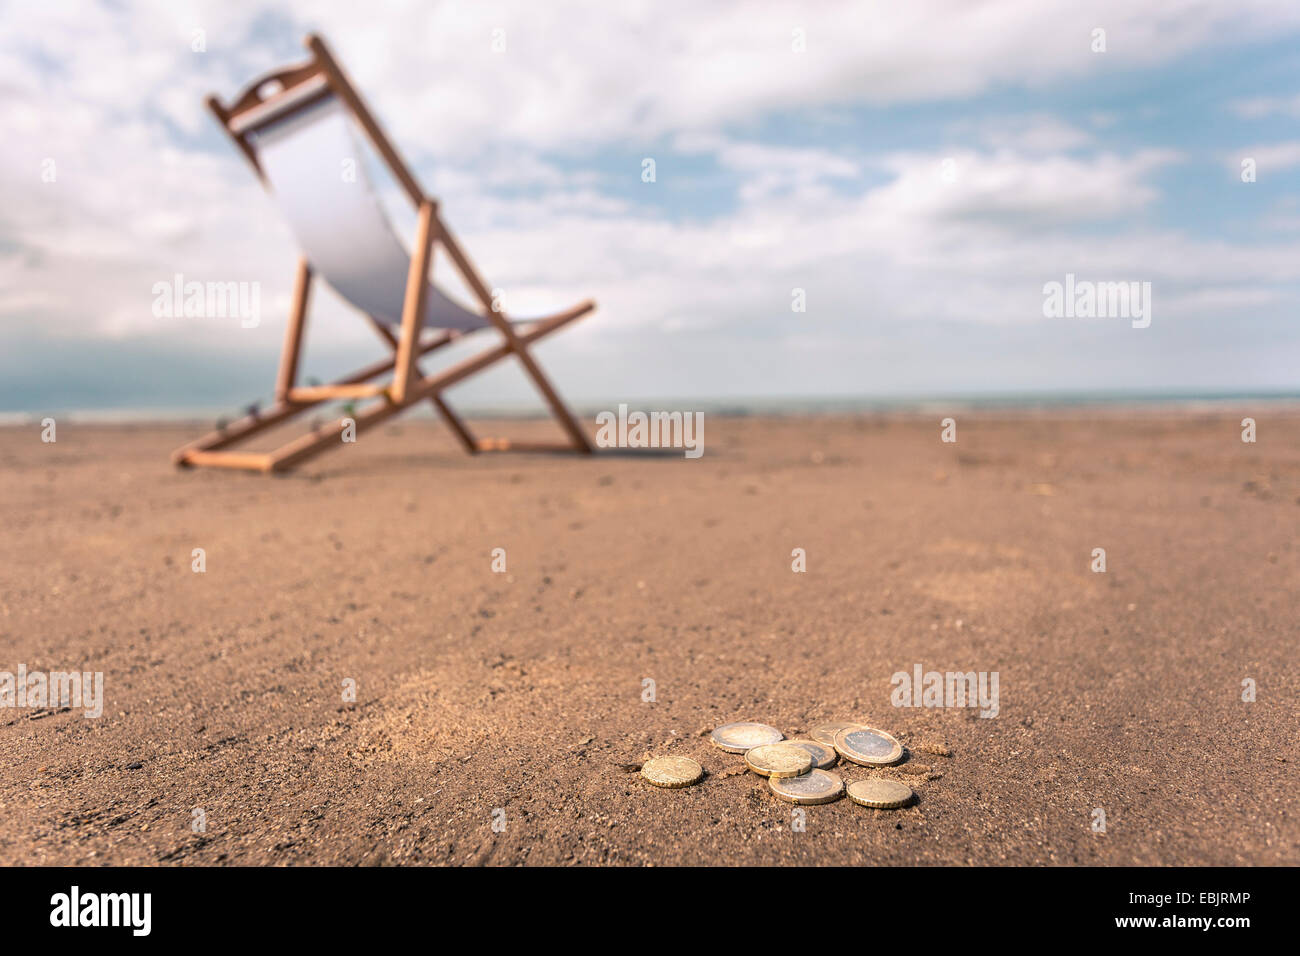 Deck chair on beach, coins on sand in foreground Stock Photo